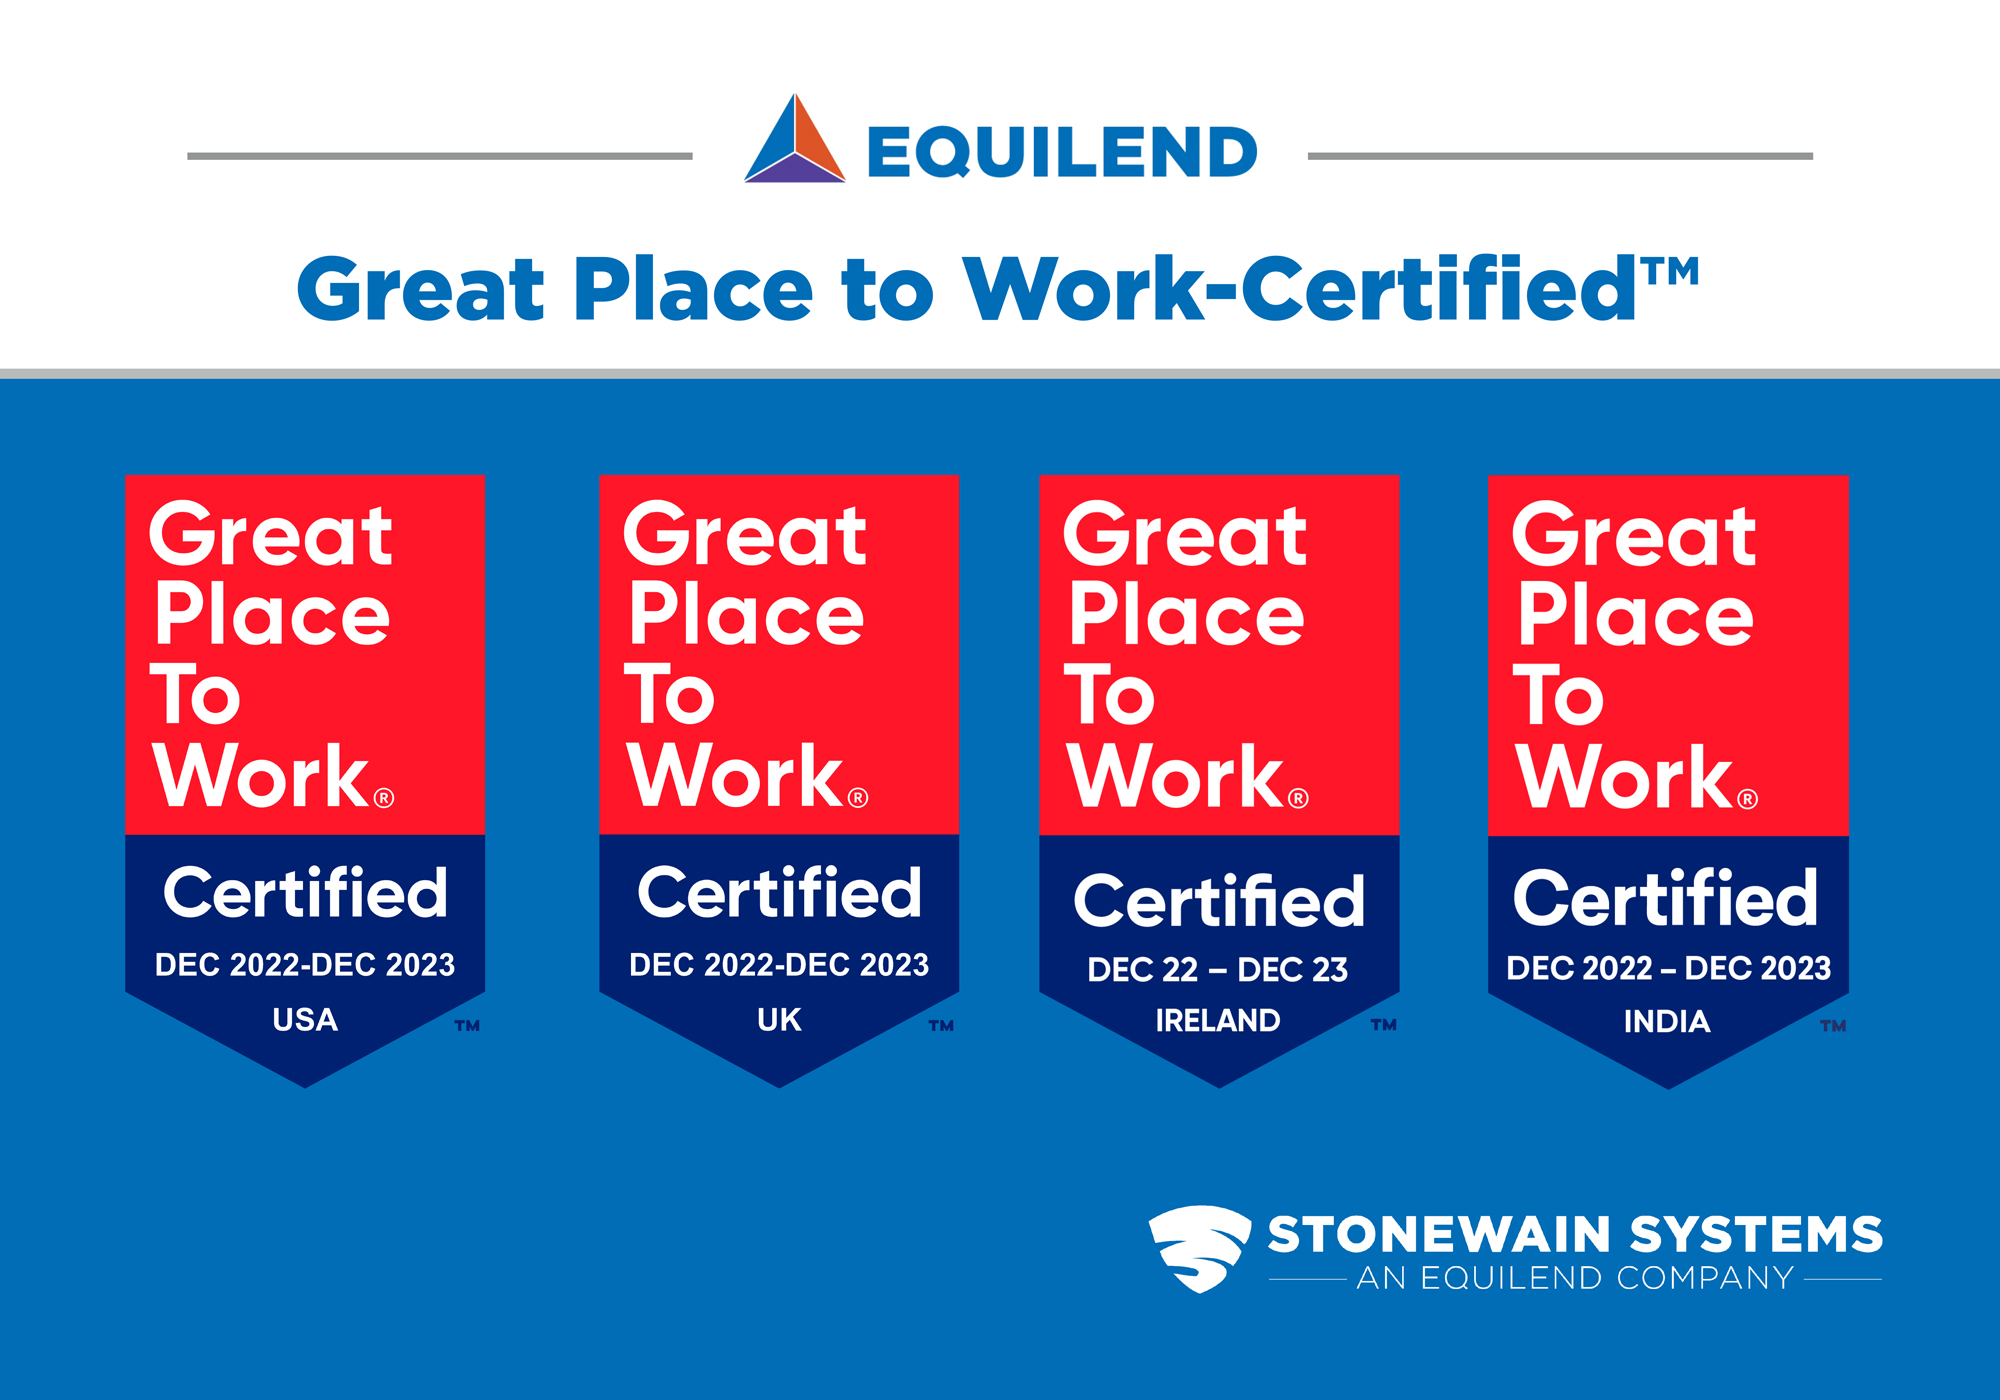 EquiLend Awarded Great Place to Work Certification in Four Key Countries, United States, United Kingdom, India, Ireland